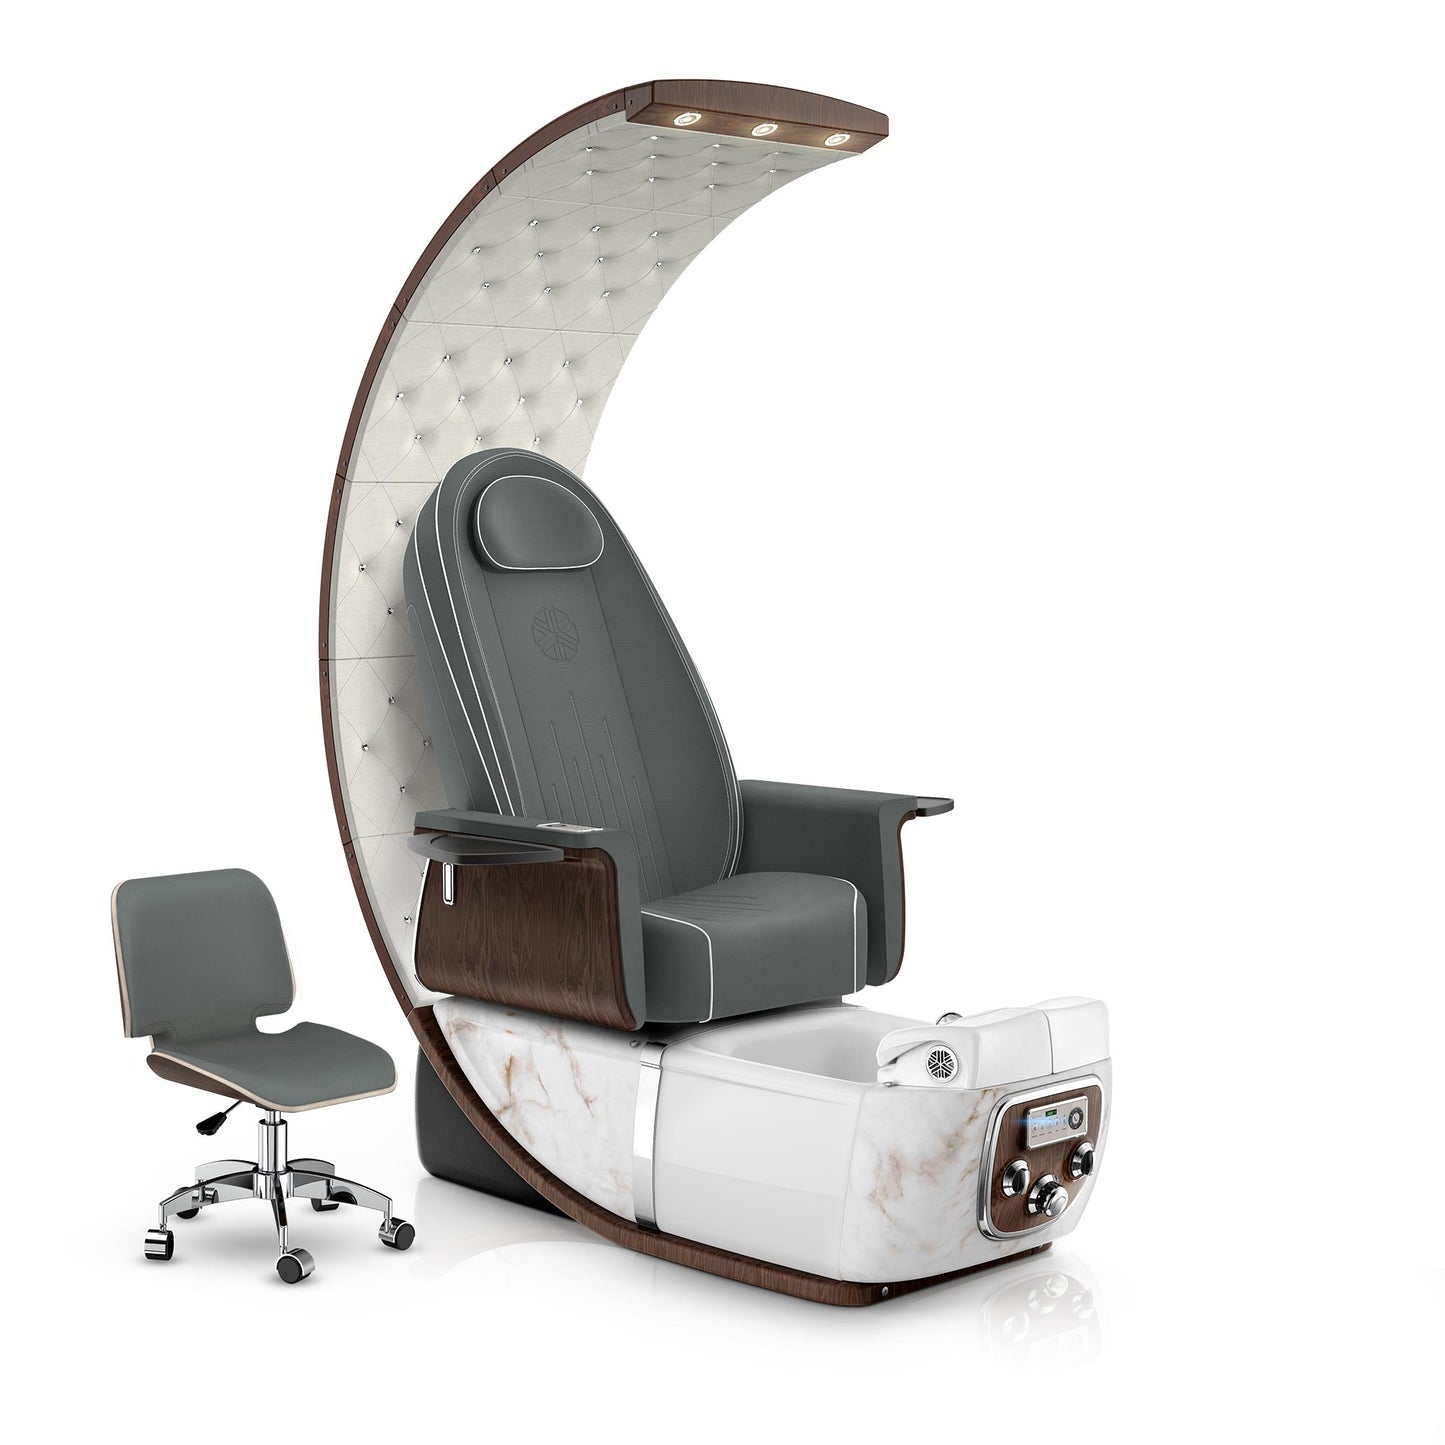 Lexor PRIVÉ Lounge pedicure chair with graphite cushion and white moonstone spa base